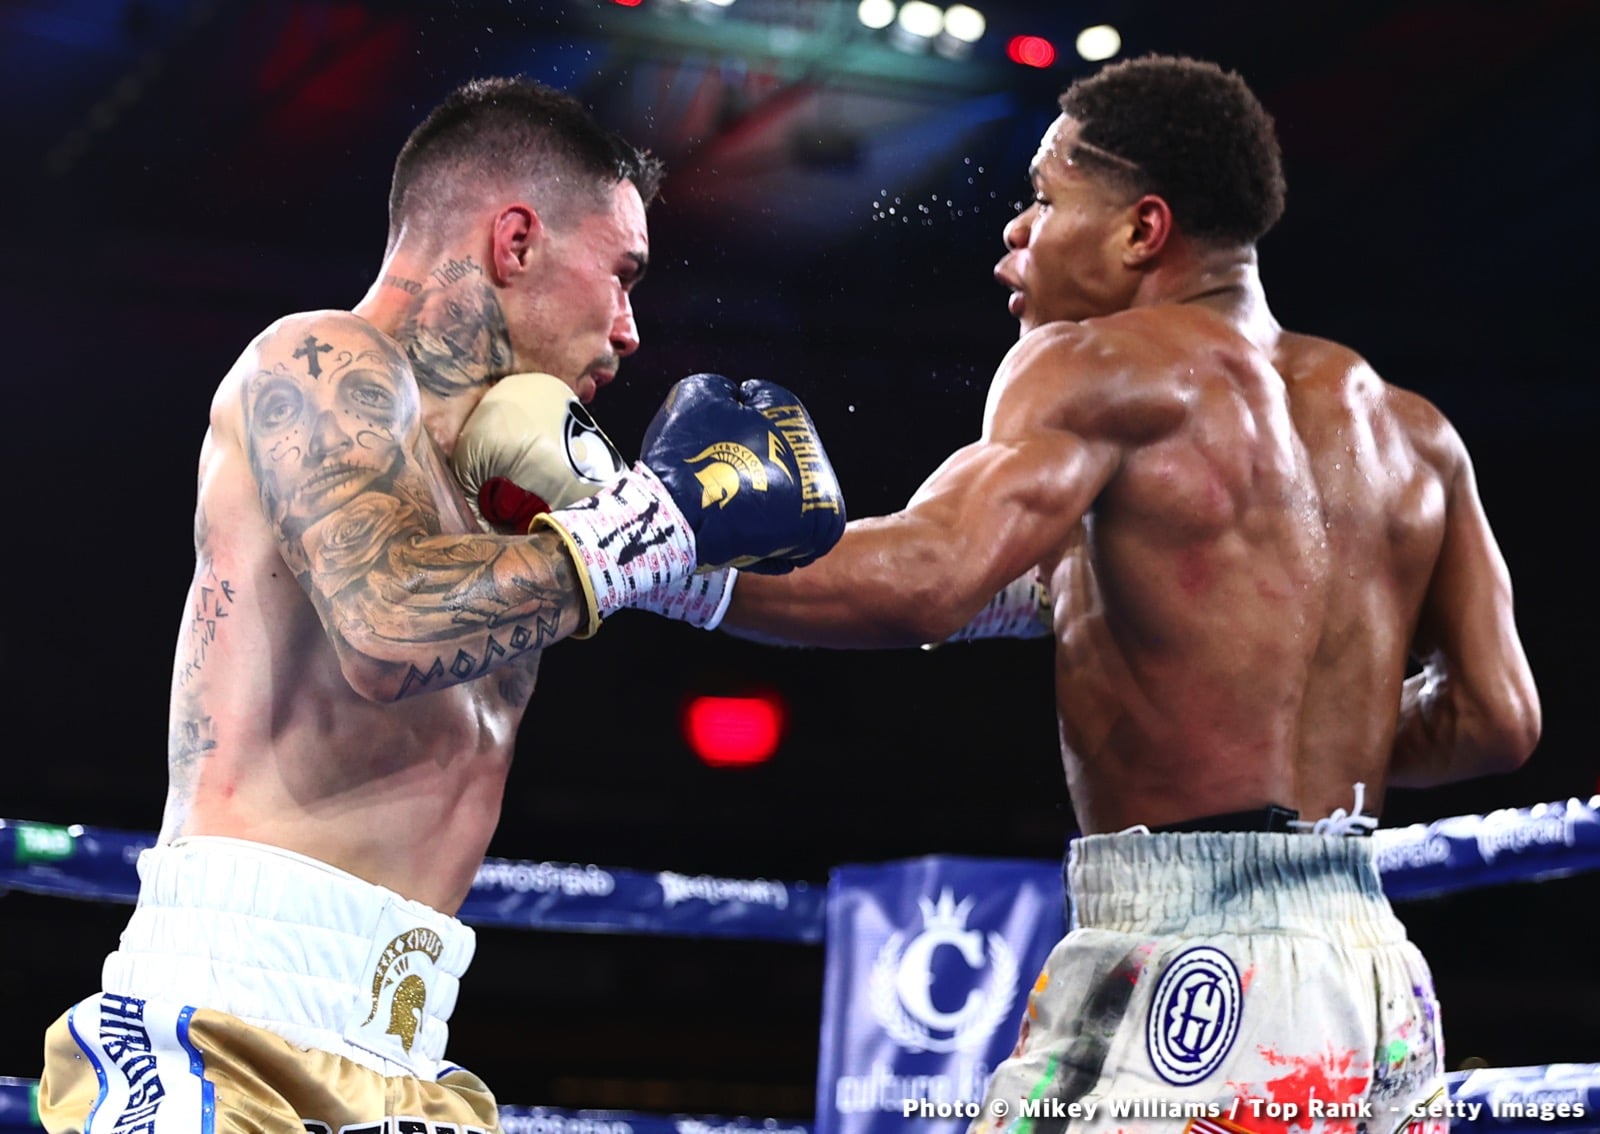 Image: Jermell Charlo supports Devin Haney over being left off Ring Magazine pound-for-pound